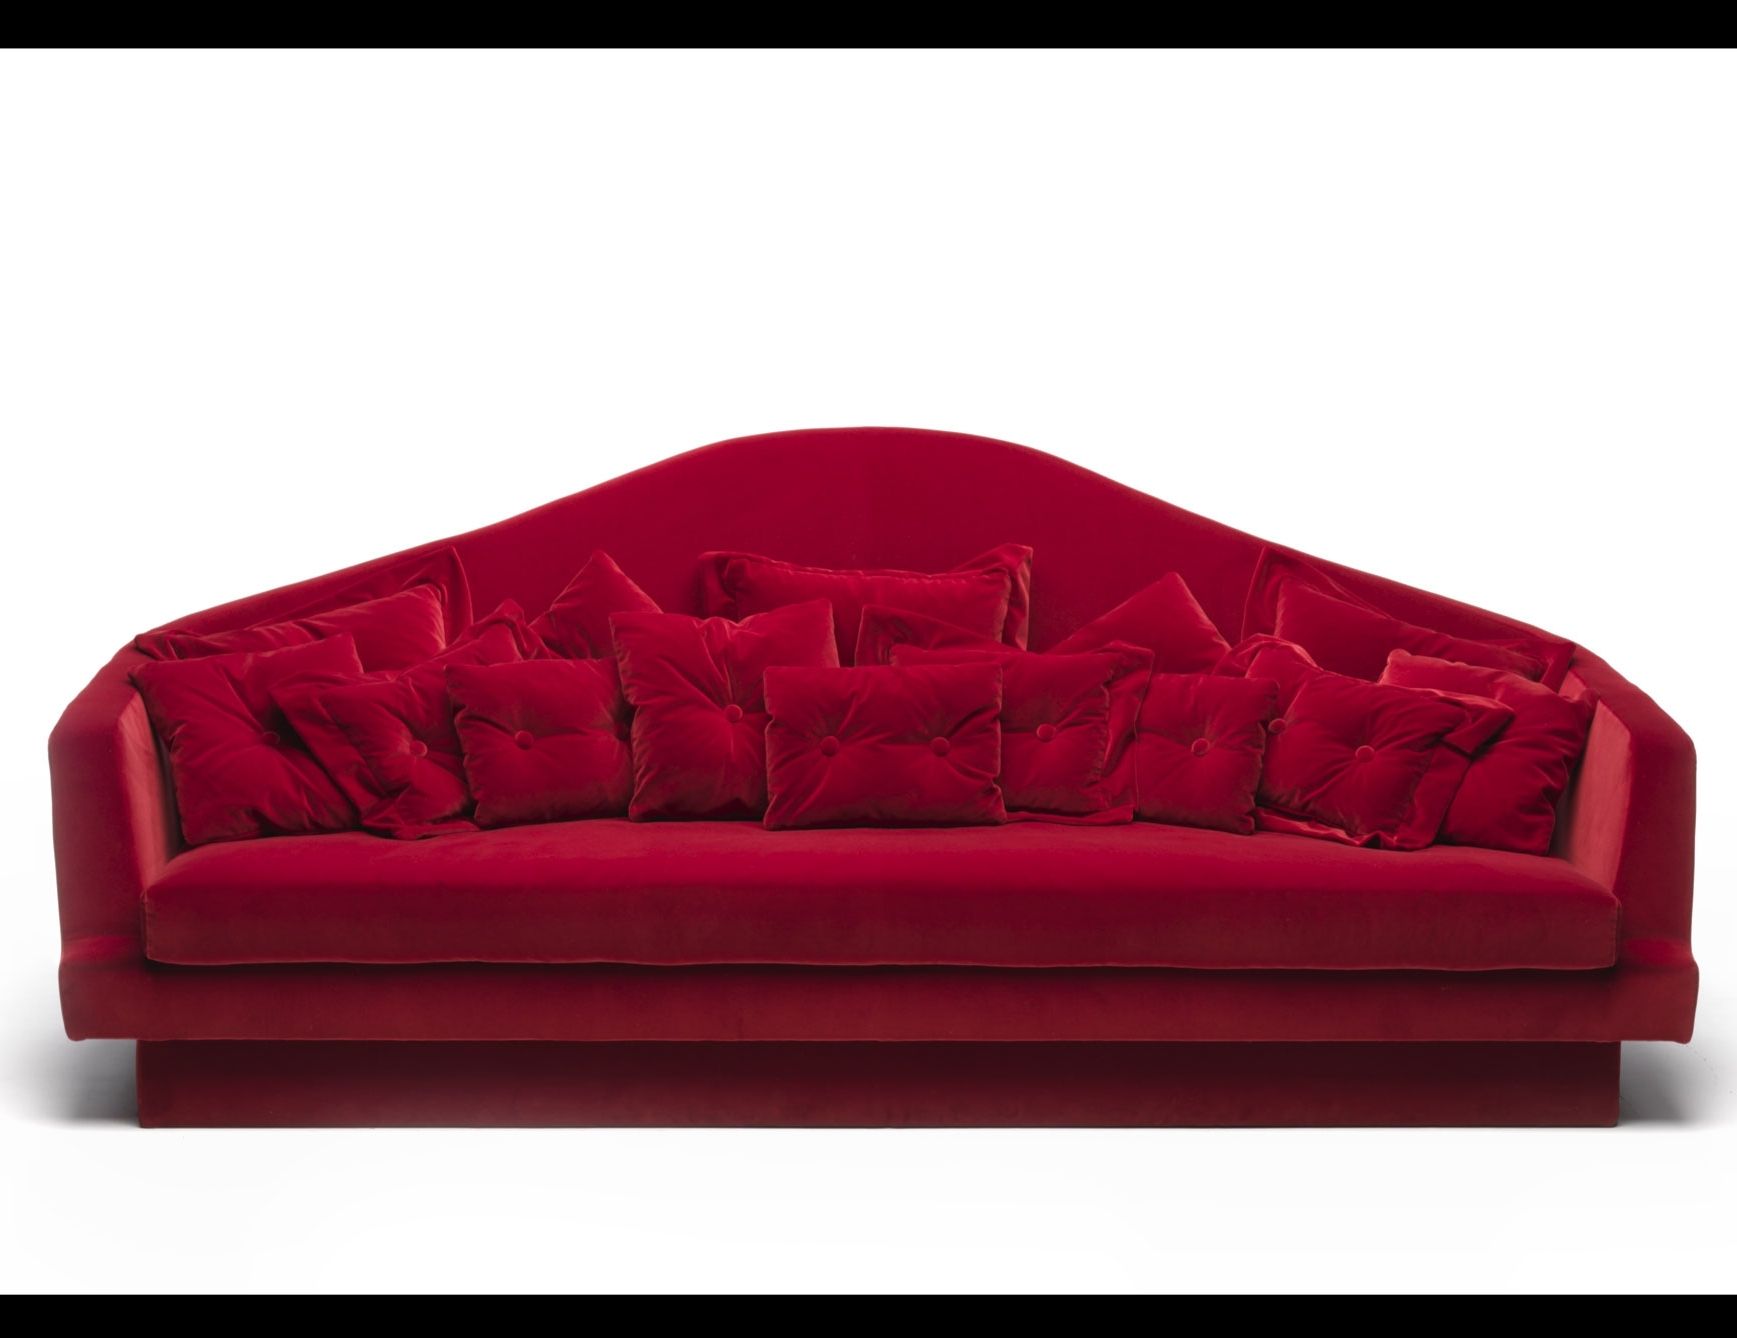 Red Sofa Chairs With Regard To Preferred Nella Vetrina Red Carpet Luxury Italian Sofa Upholstered In Red Fabric (View 13 of 20)